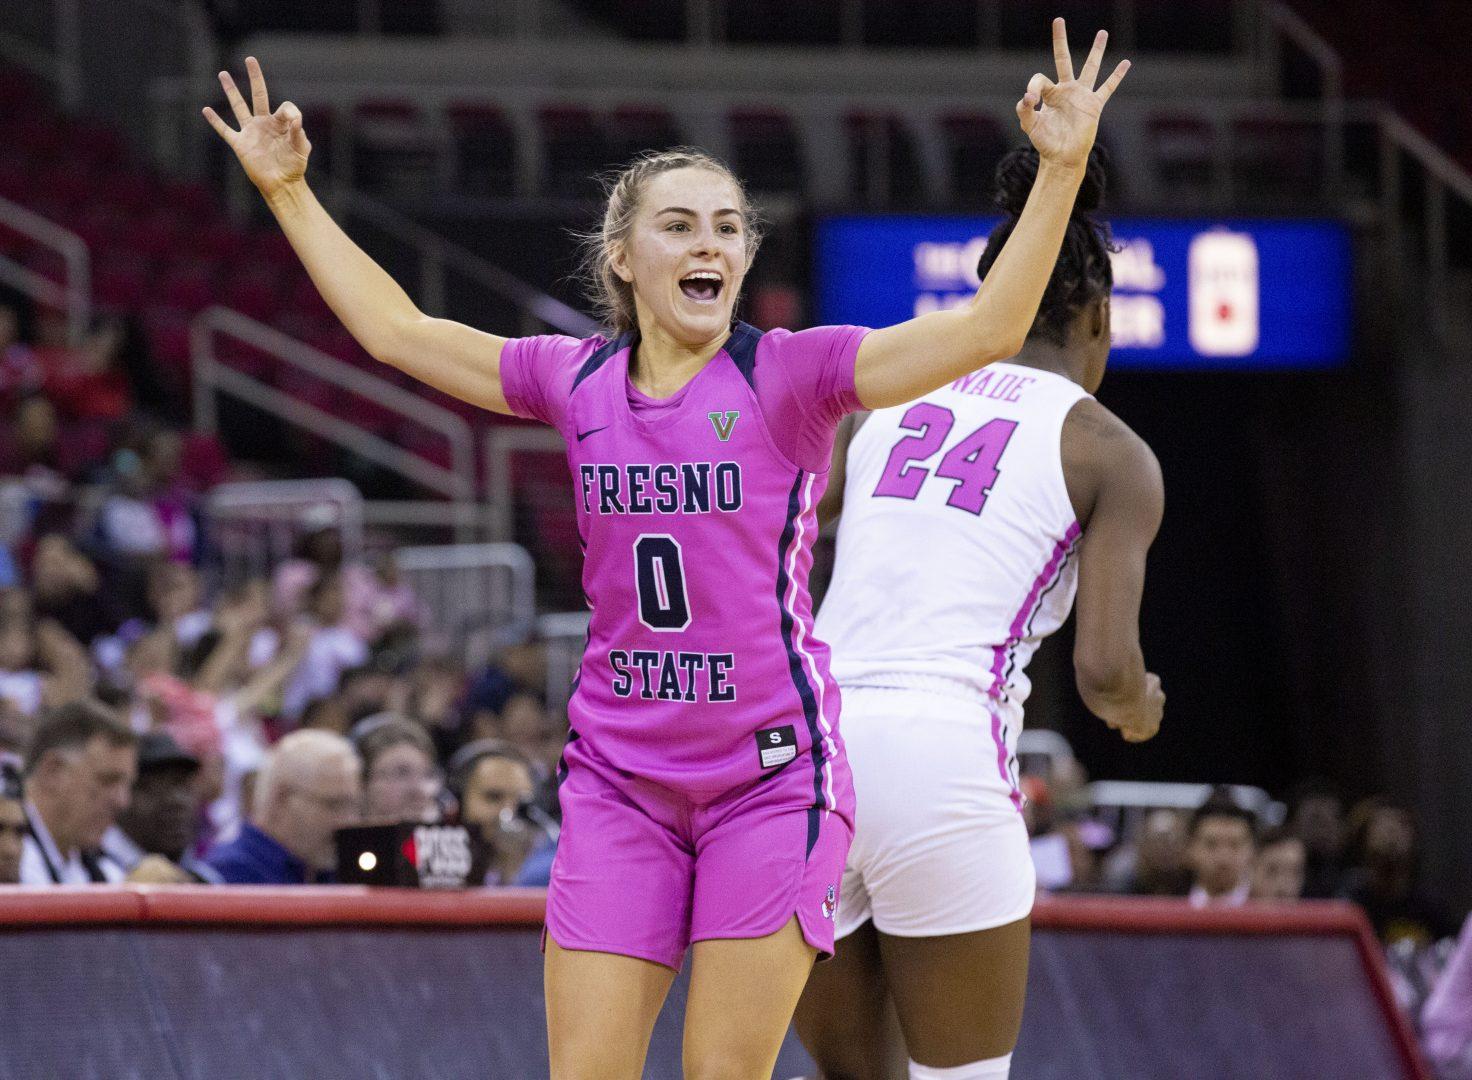 Hanna Cavinder (0) celebrates her 3-point shot, during the second half of Saturday’s game against UNLV Rebels on Feb. 8, 2020 at the Save Mart Center. (Armando Carreno/The Collegian.)